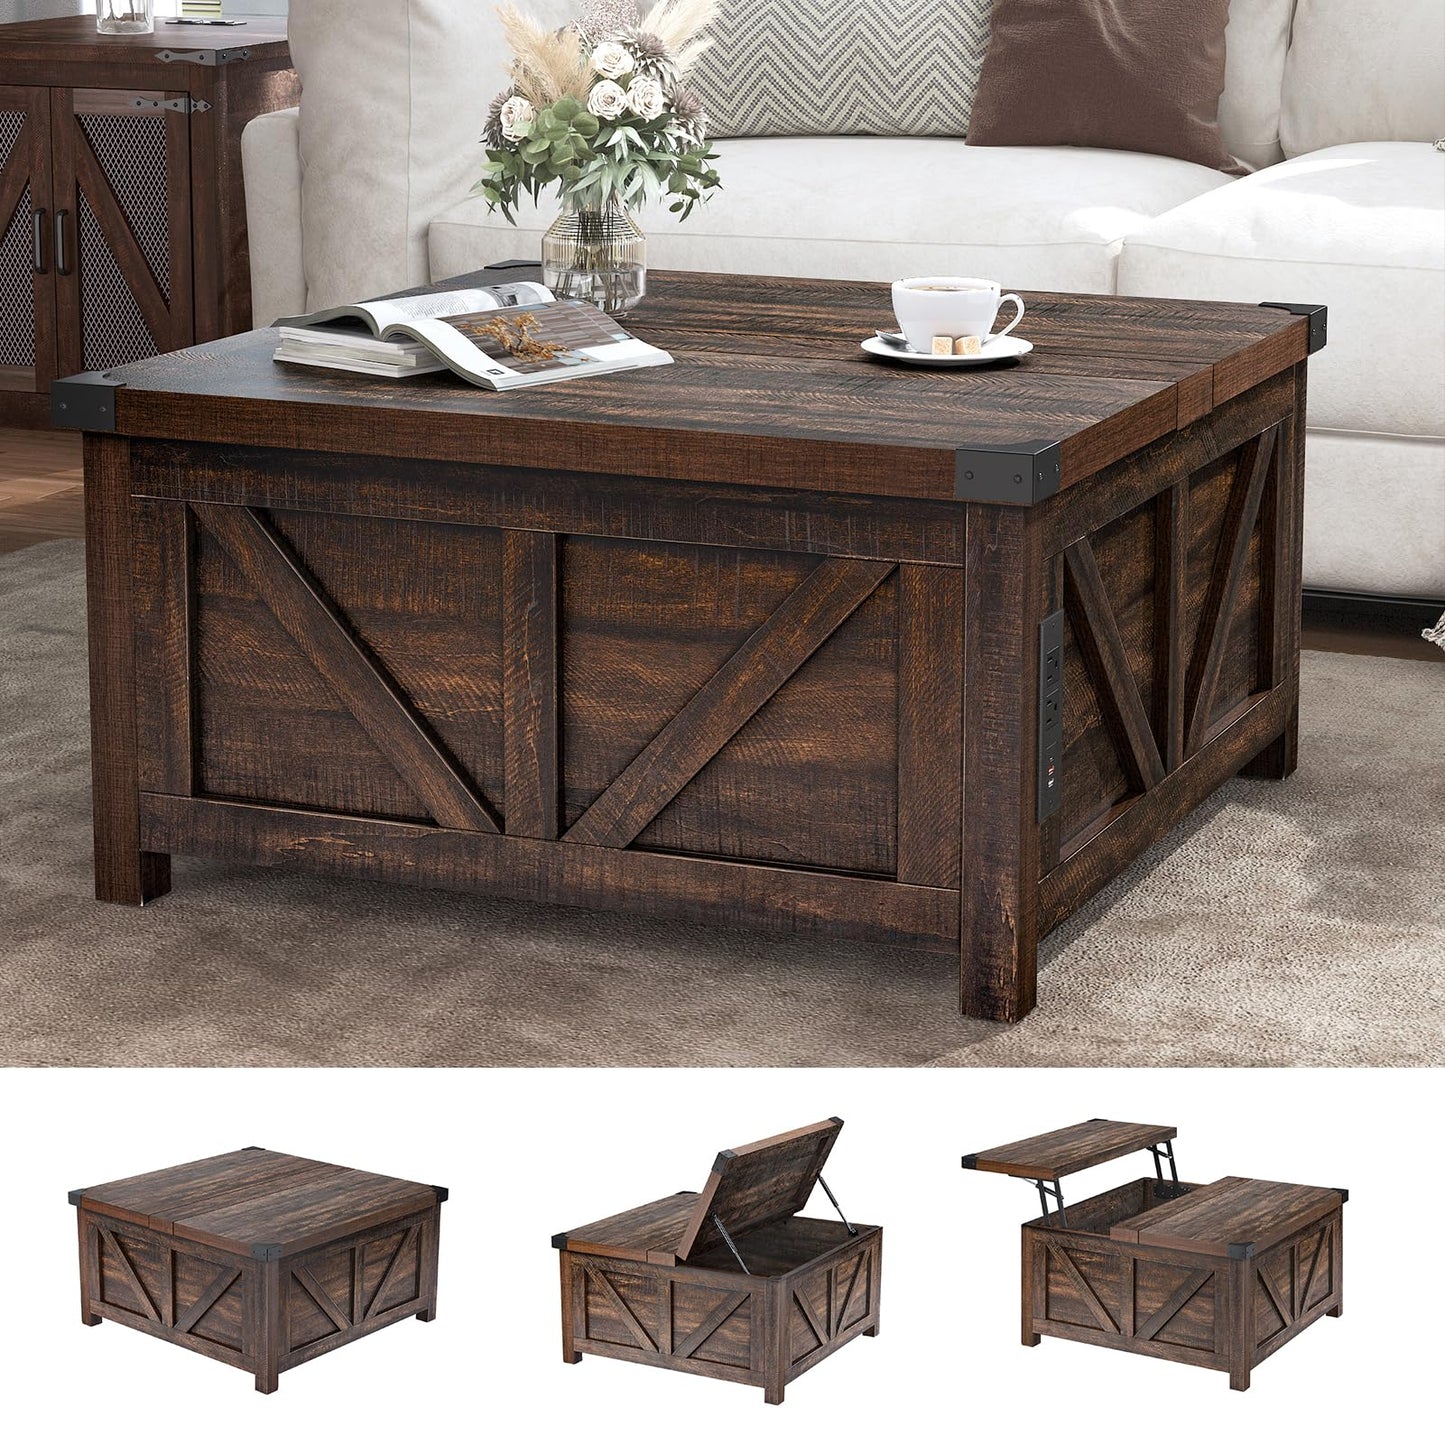 jimeimen Farmhouse Lift Top Coffee Table with Storage, Wood Square Center Table with Charging Station&USB Ports, Living Room Central Table w/Large Hidden Space, for Living Room, Bedroom, Home Office